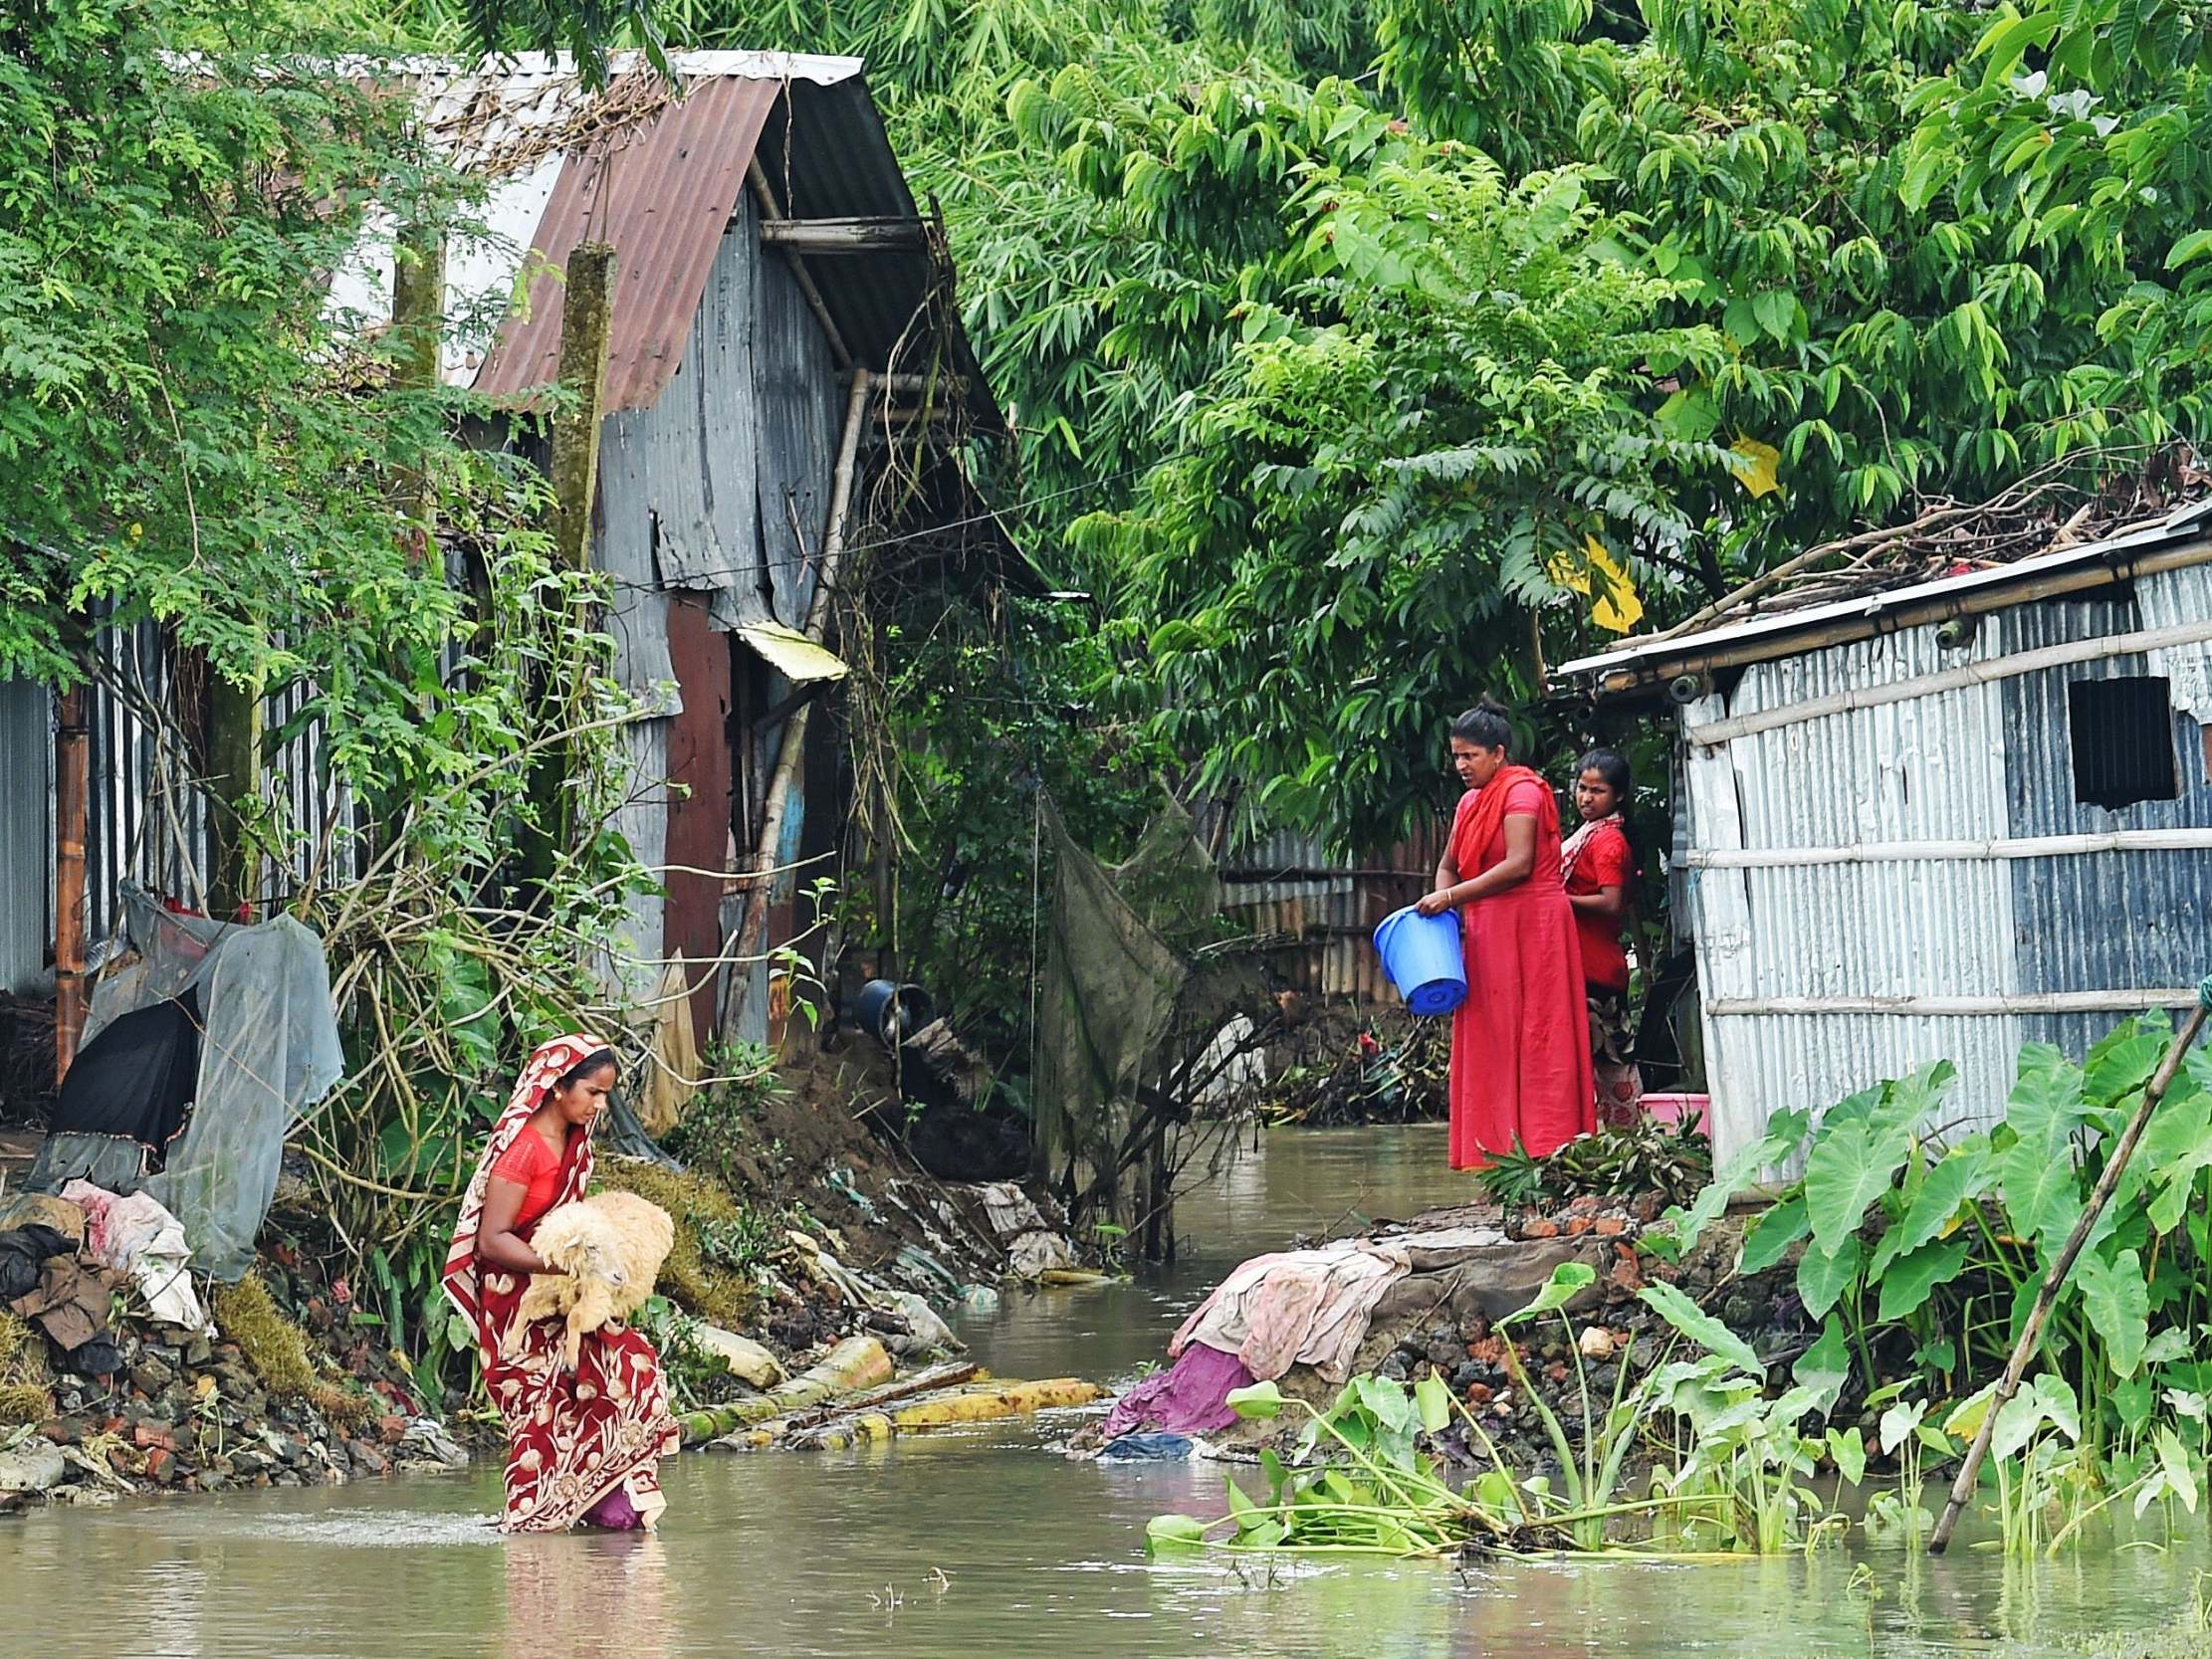 Bangladesh floods: More than a million people left stranded amid ...